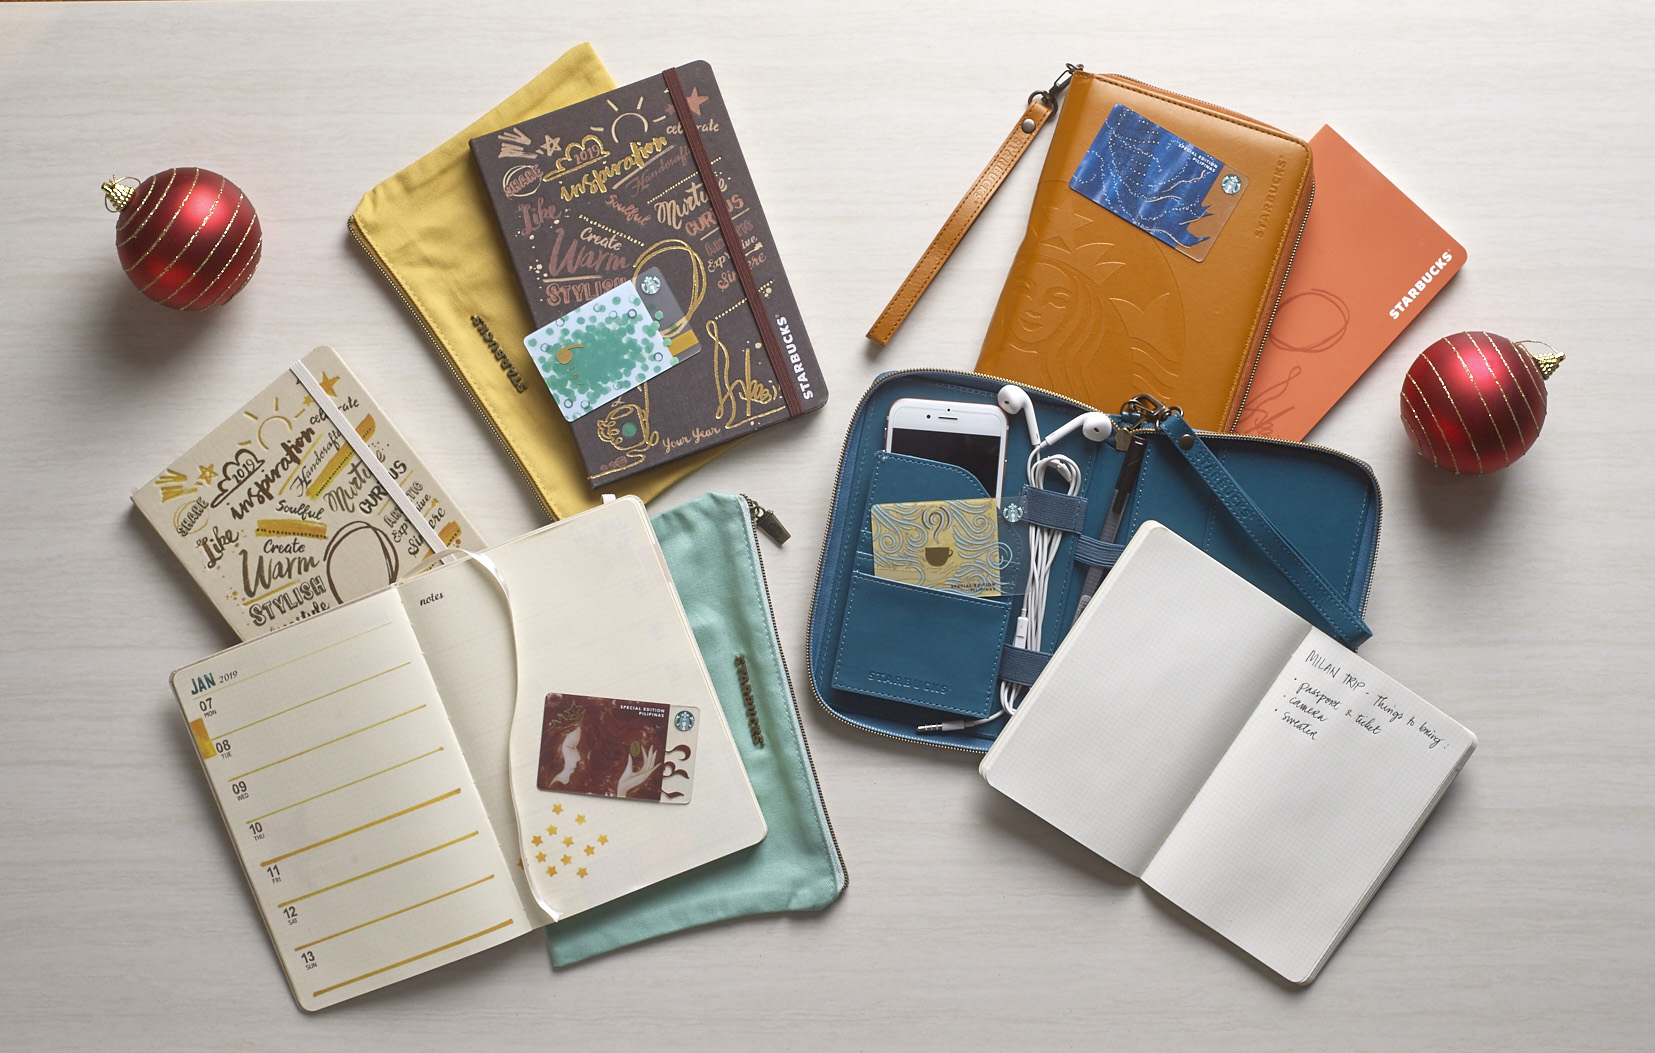 IT'S HERE. Starbucks Philippines presents its 2019 planners and travel organizers. Photo courtesy of Starbucks Philippines 